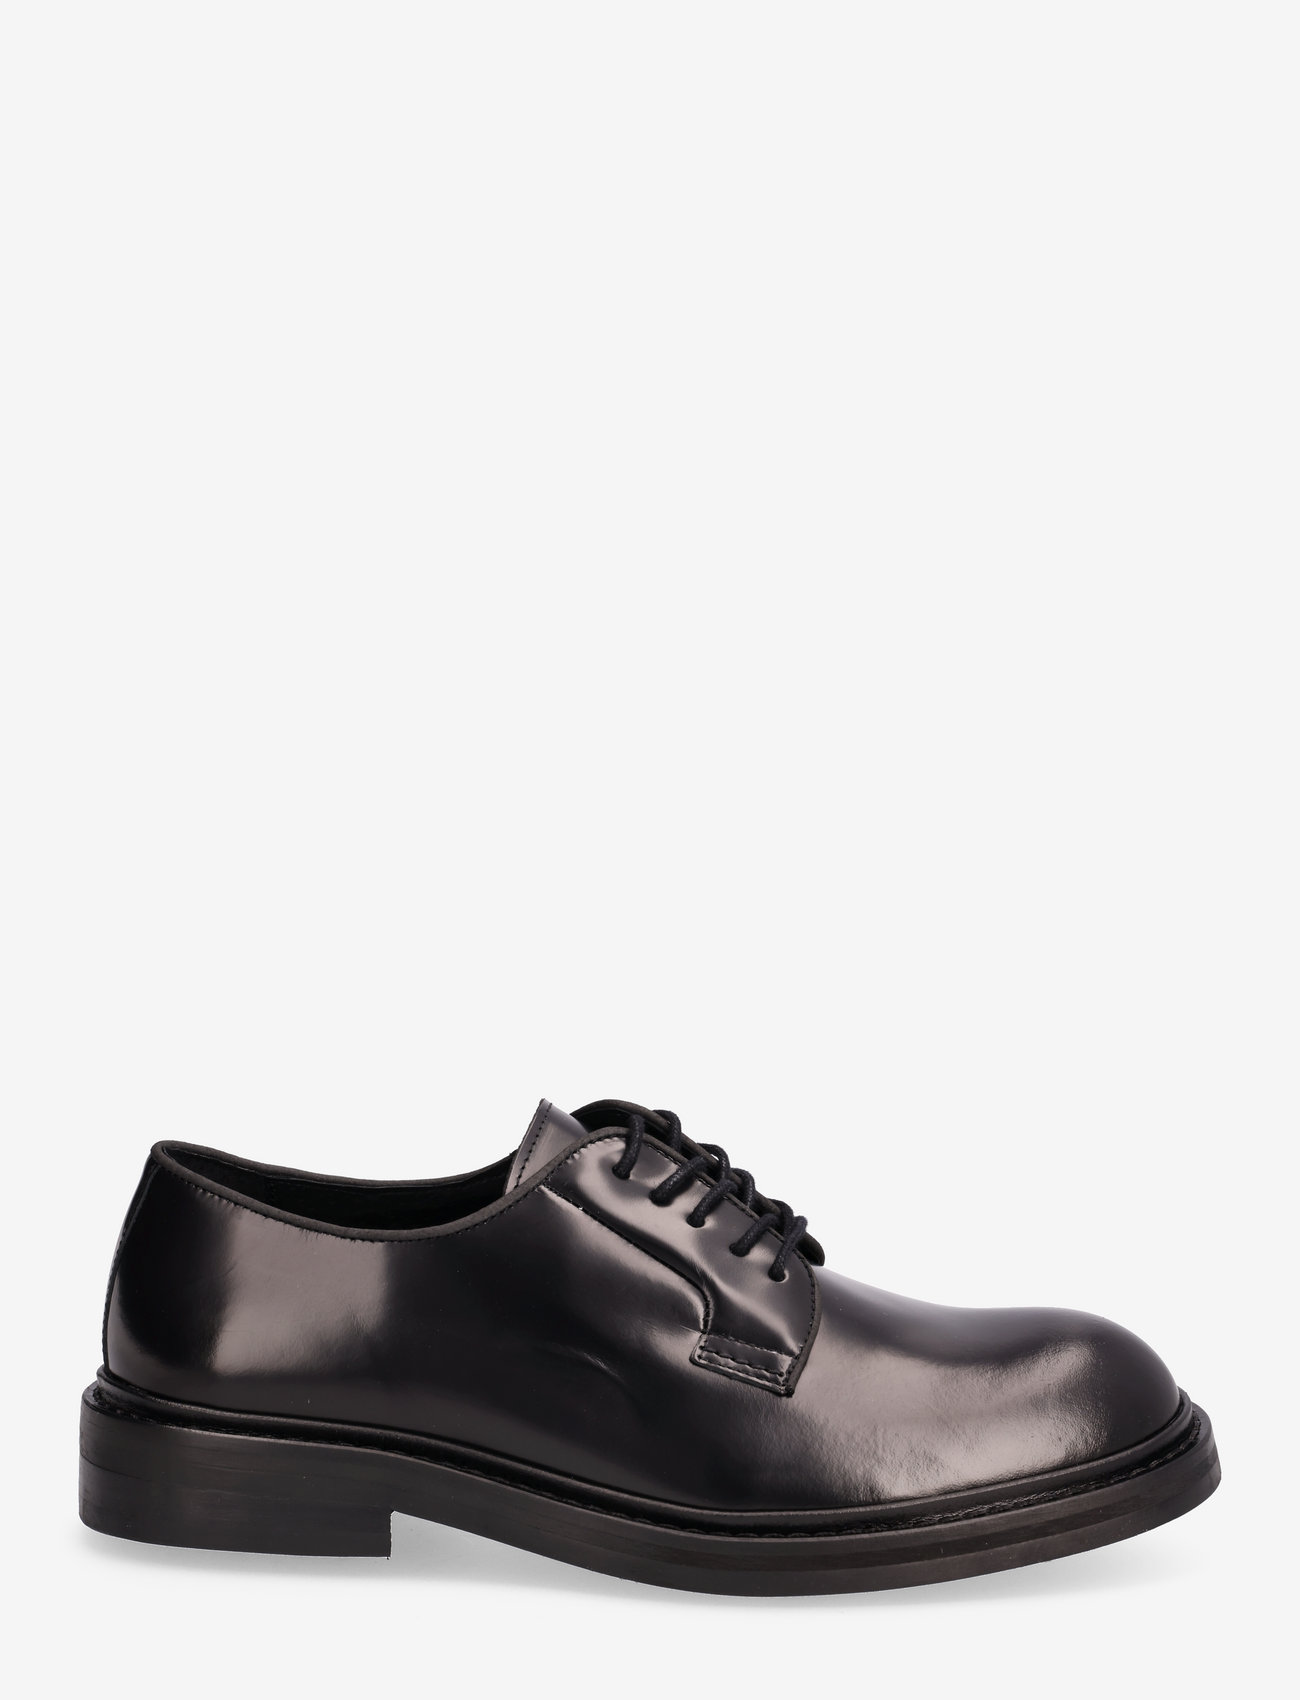 Selected Homme - SLHCARTER LEATHER BLUCHER SHOE B - laced shoes - black - 1